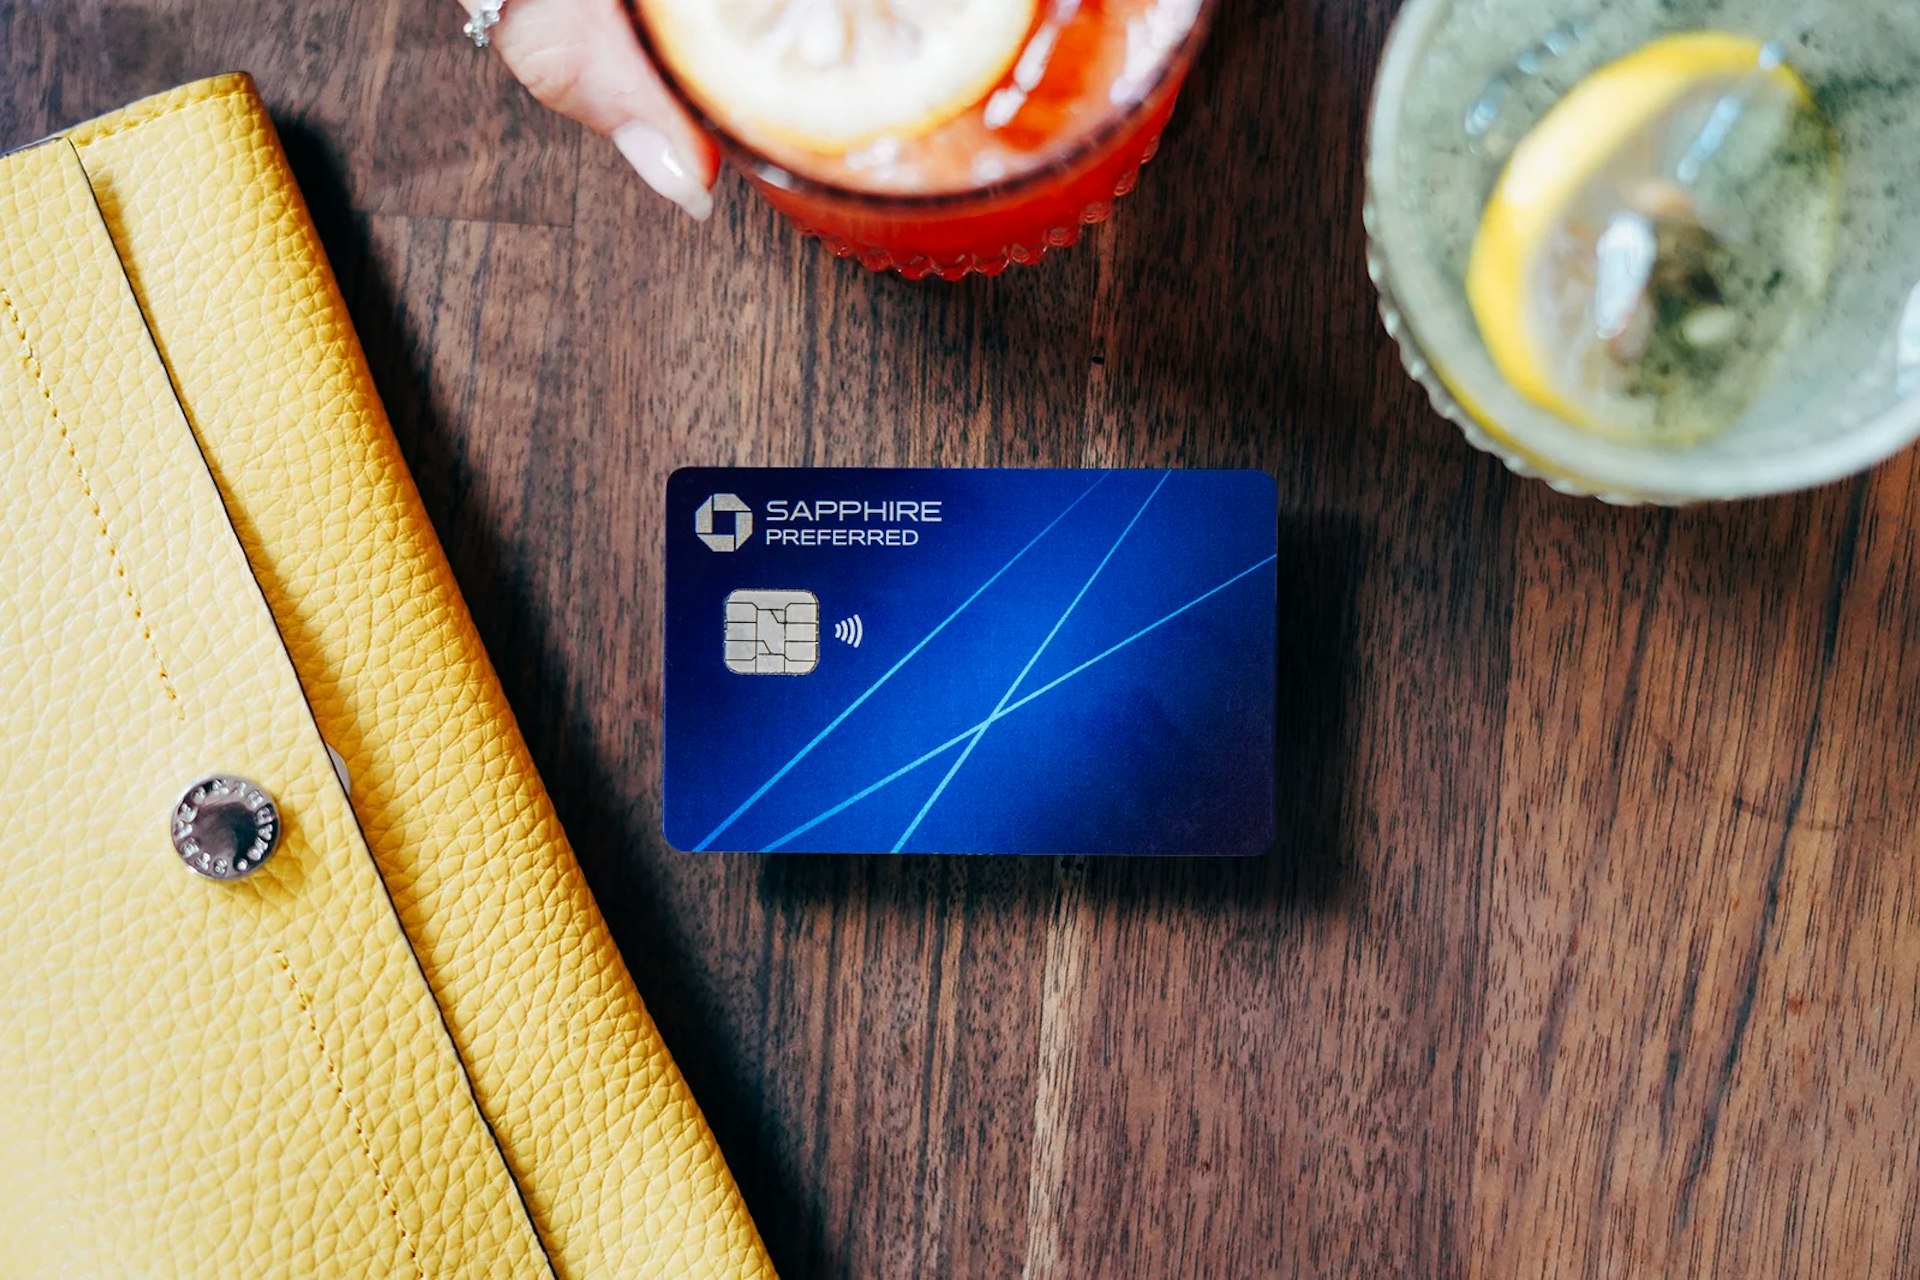 The Chase Sapphire Card